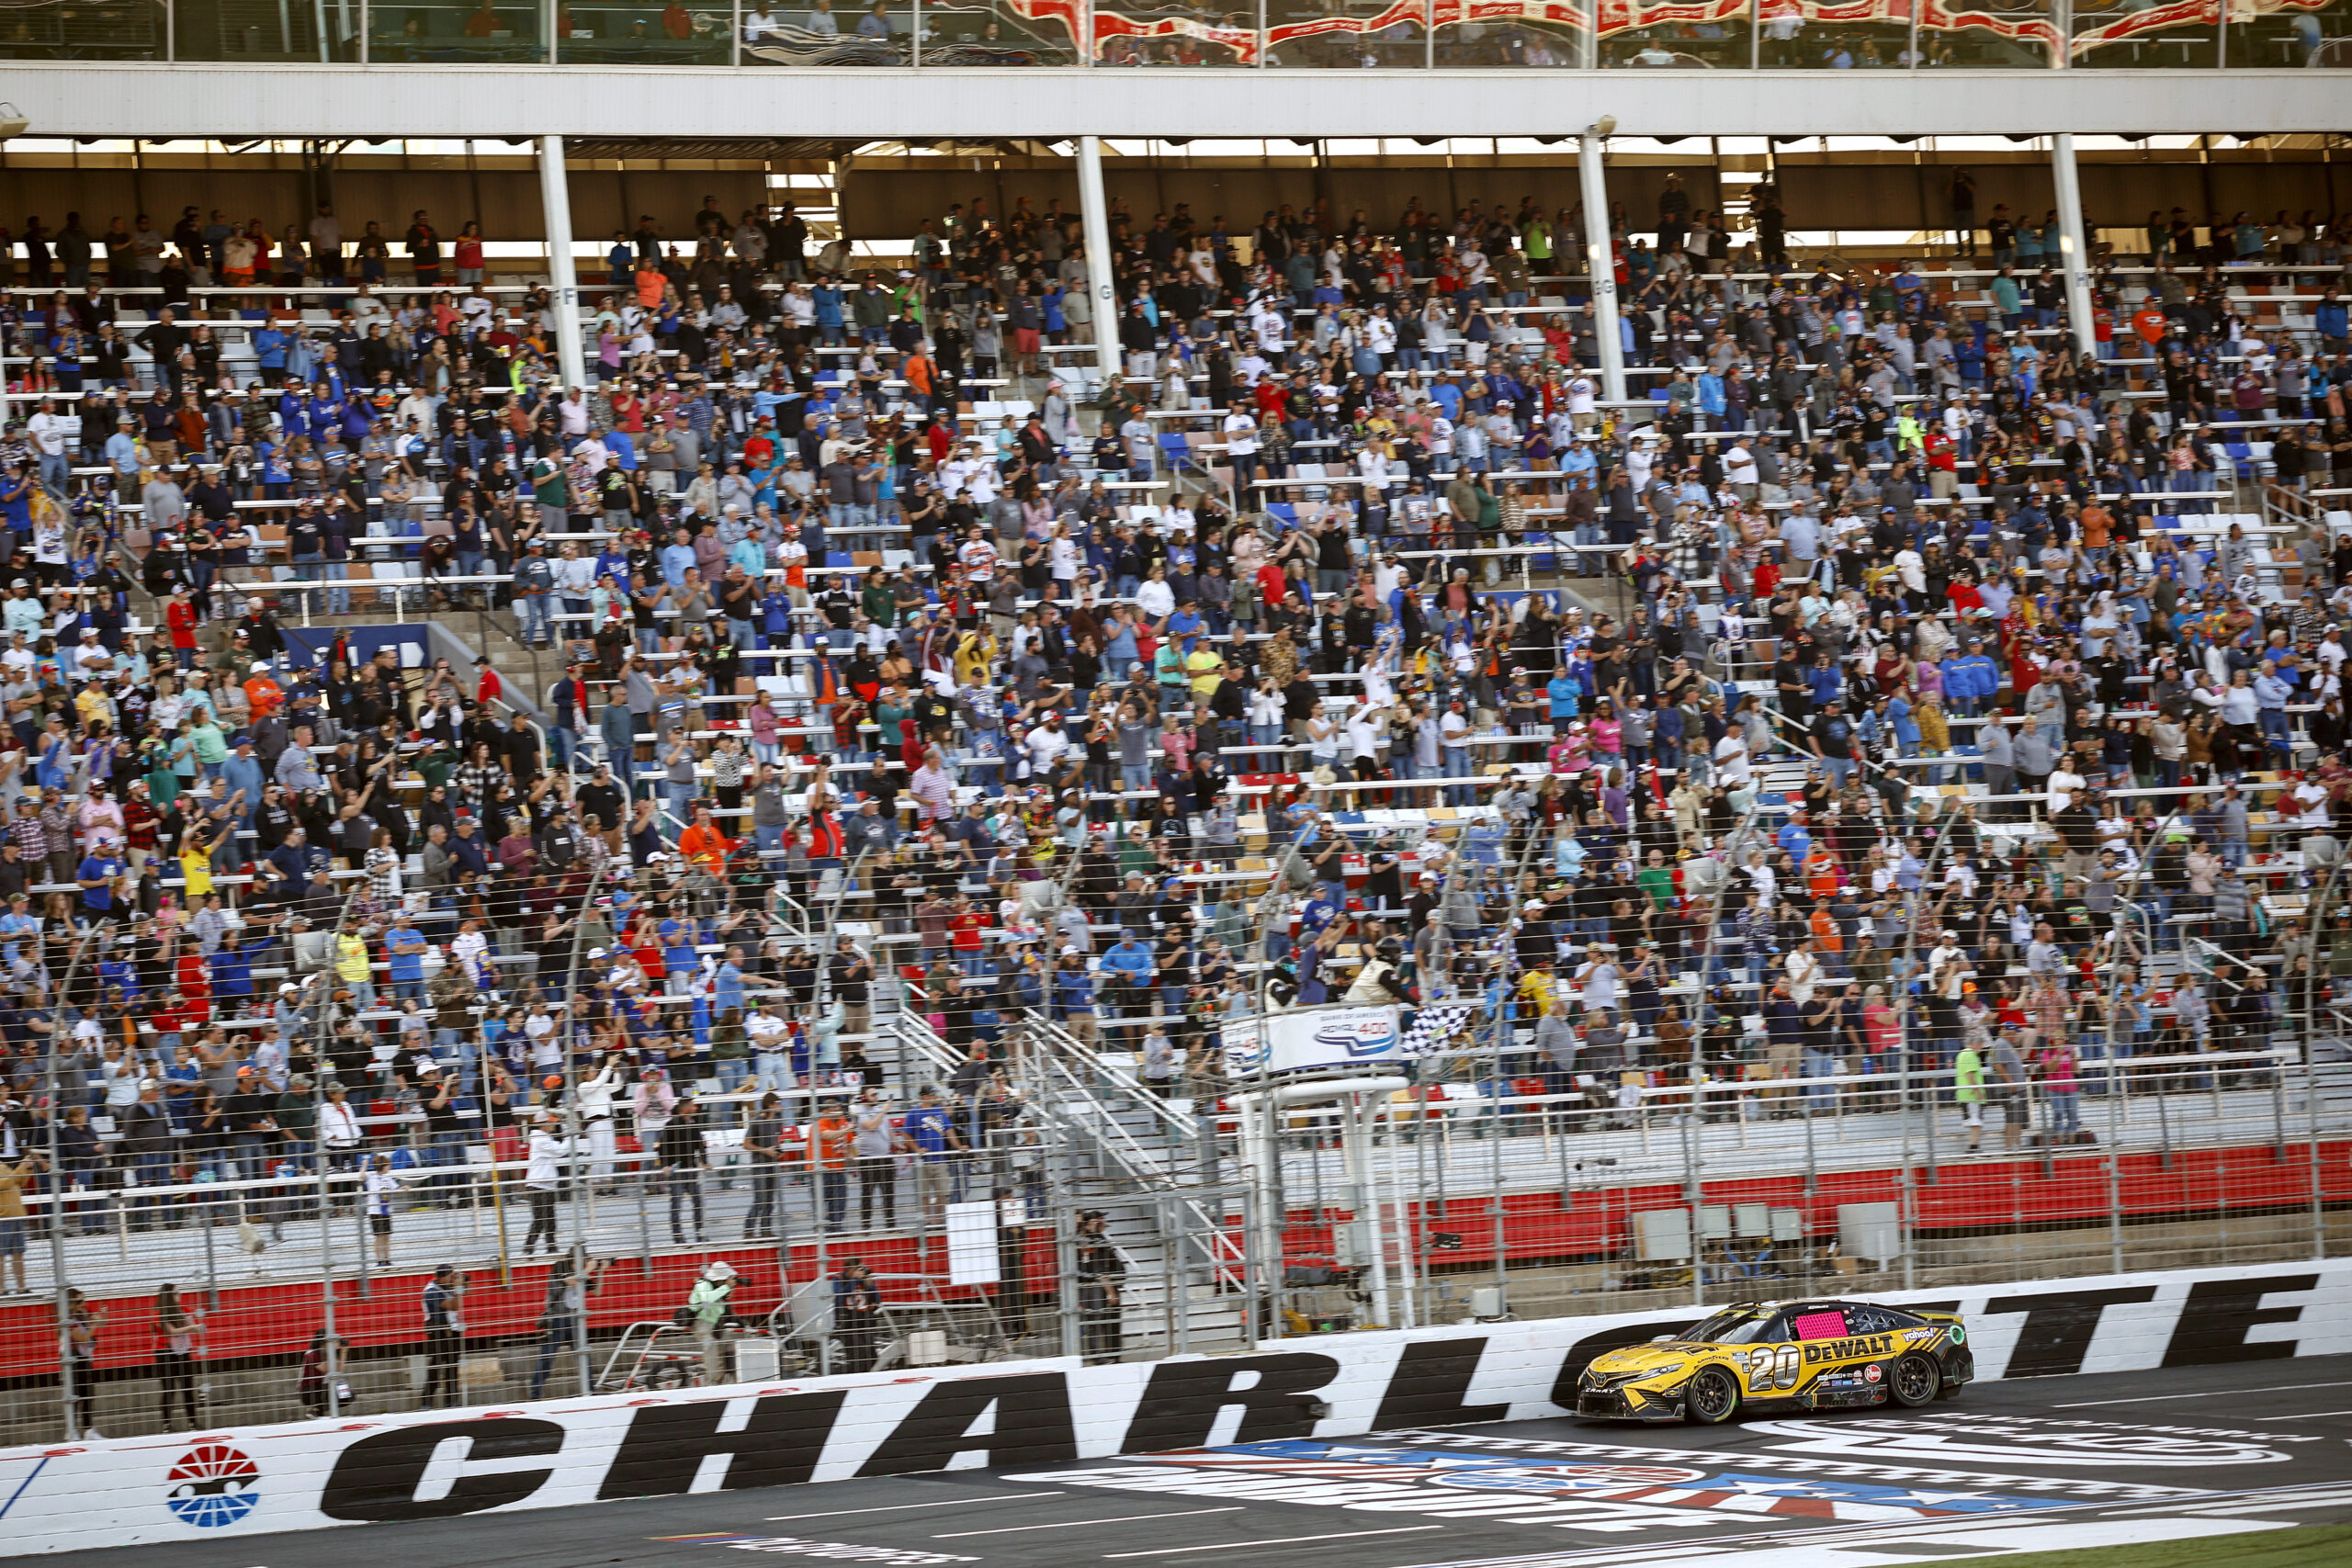 How to Watch This Weeks NASCAR Race at Charlotte (Coca-Cola 600)